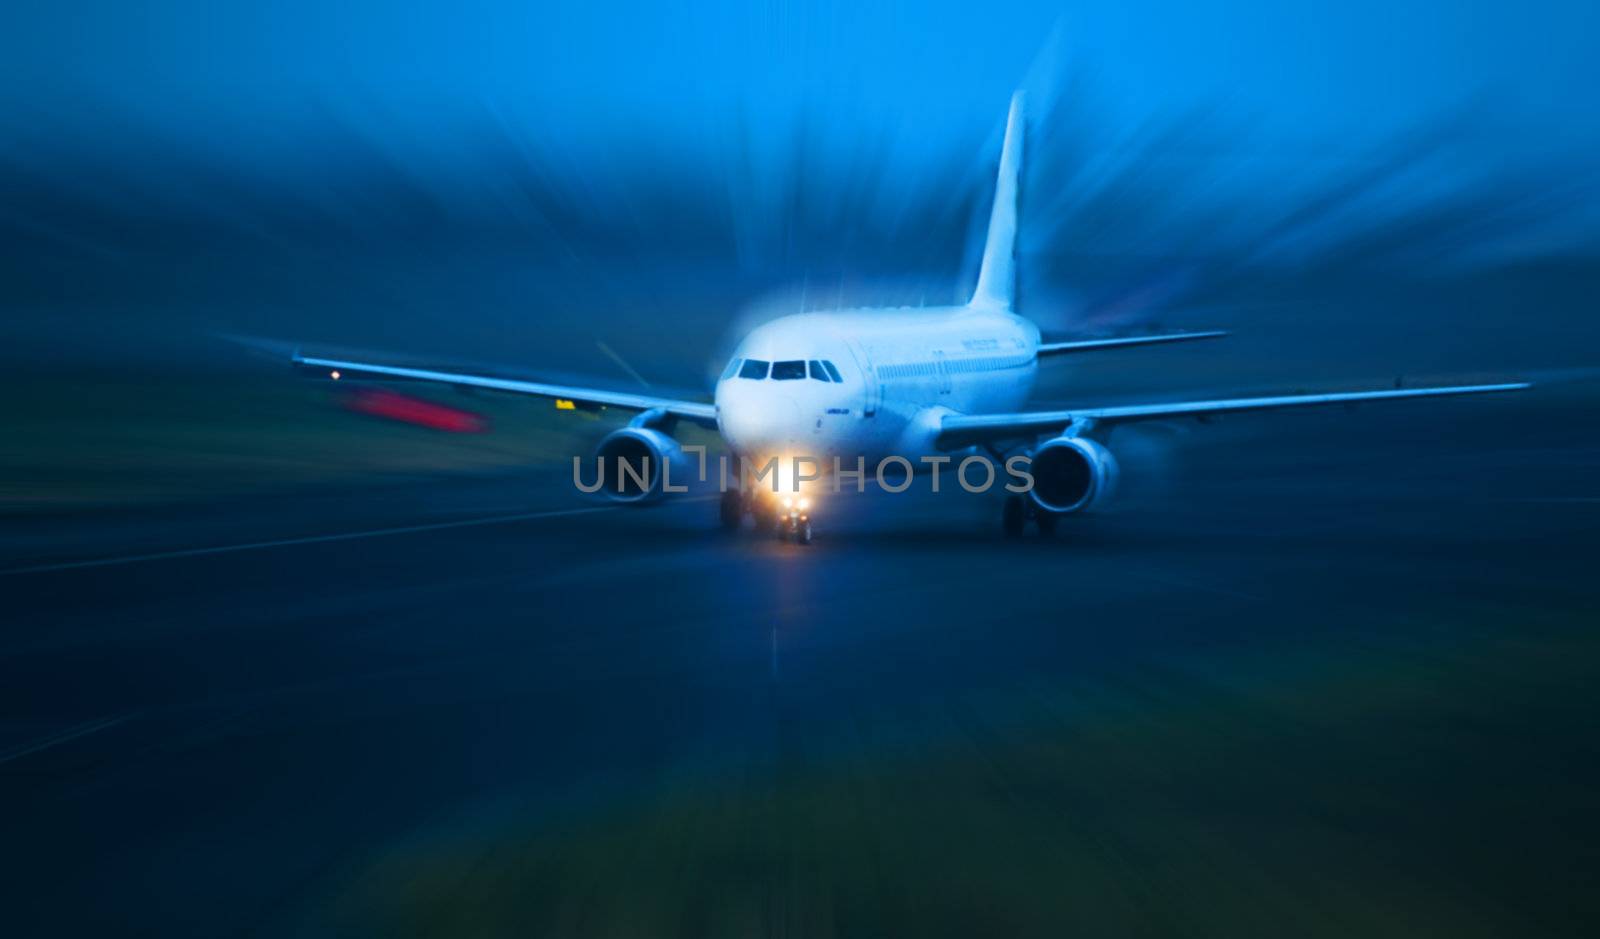 Plane takes of at dusk by photocreo